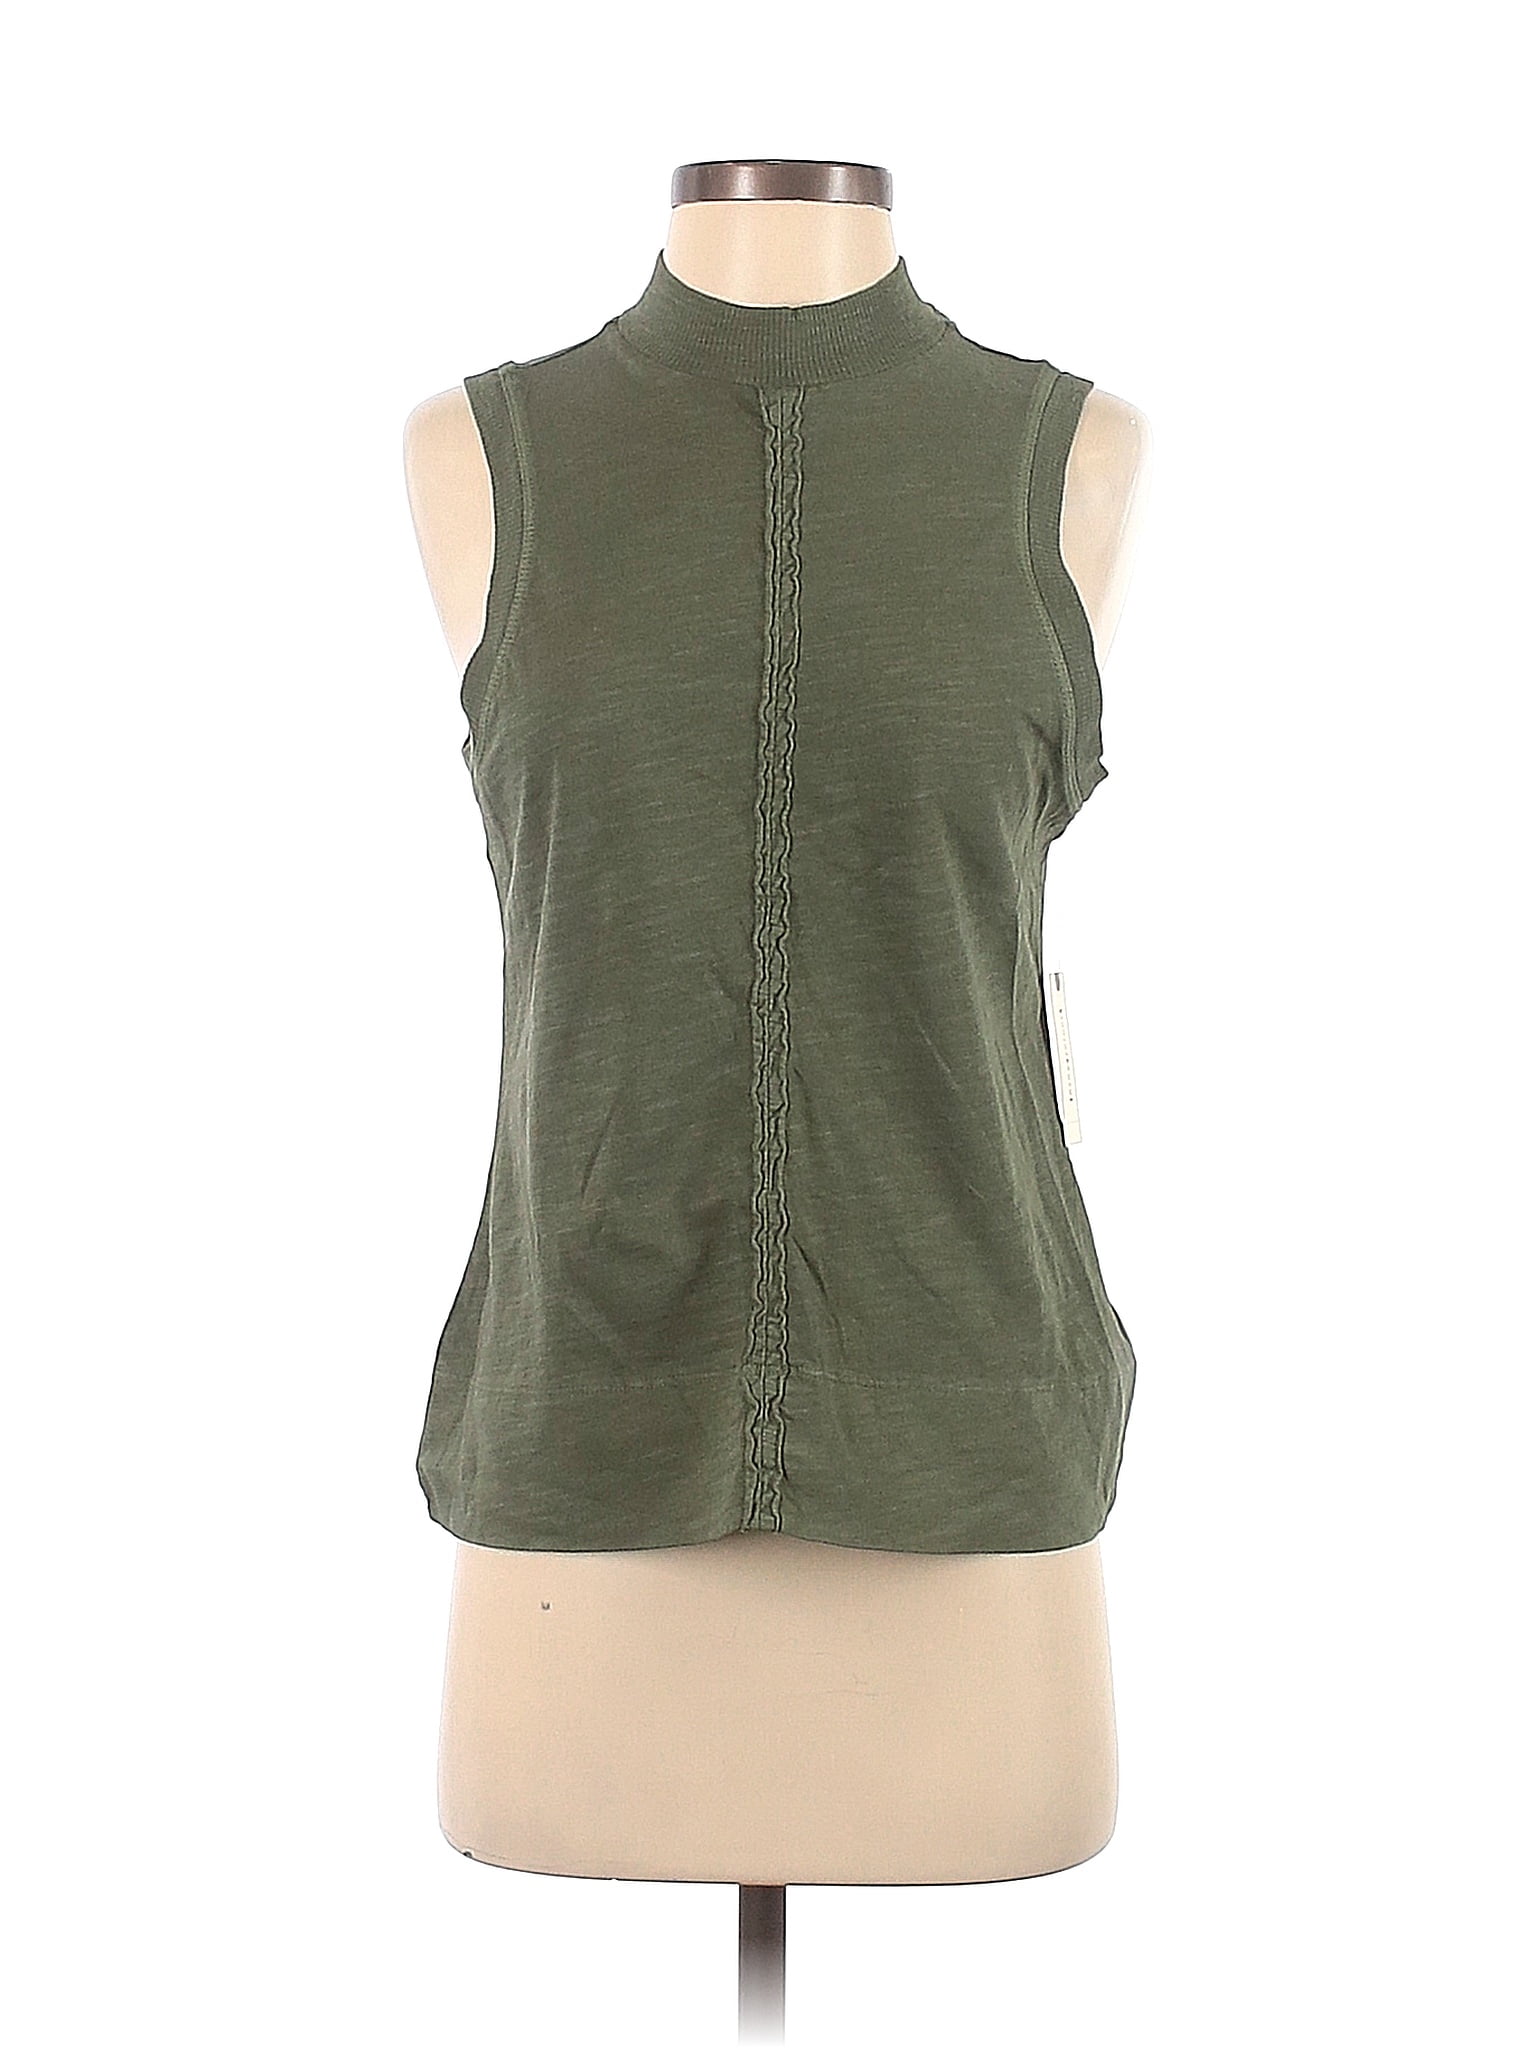 Anthropologie 100% Cotton Solid Green Sleeveless T-Shirt Size XS - 58% ...